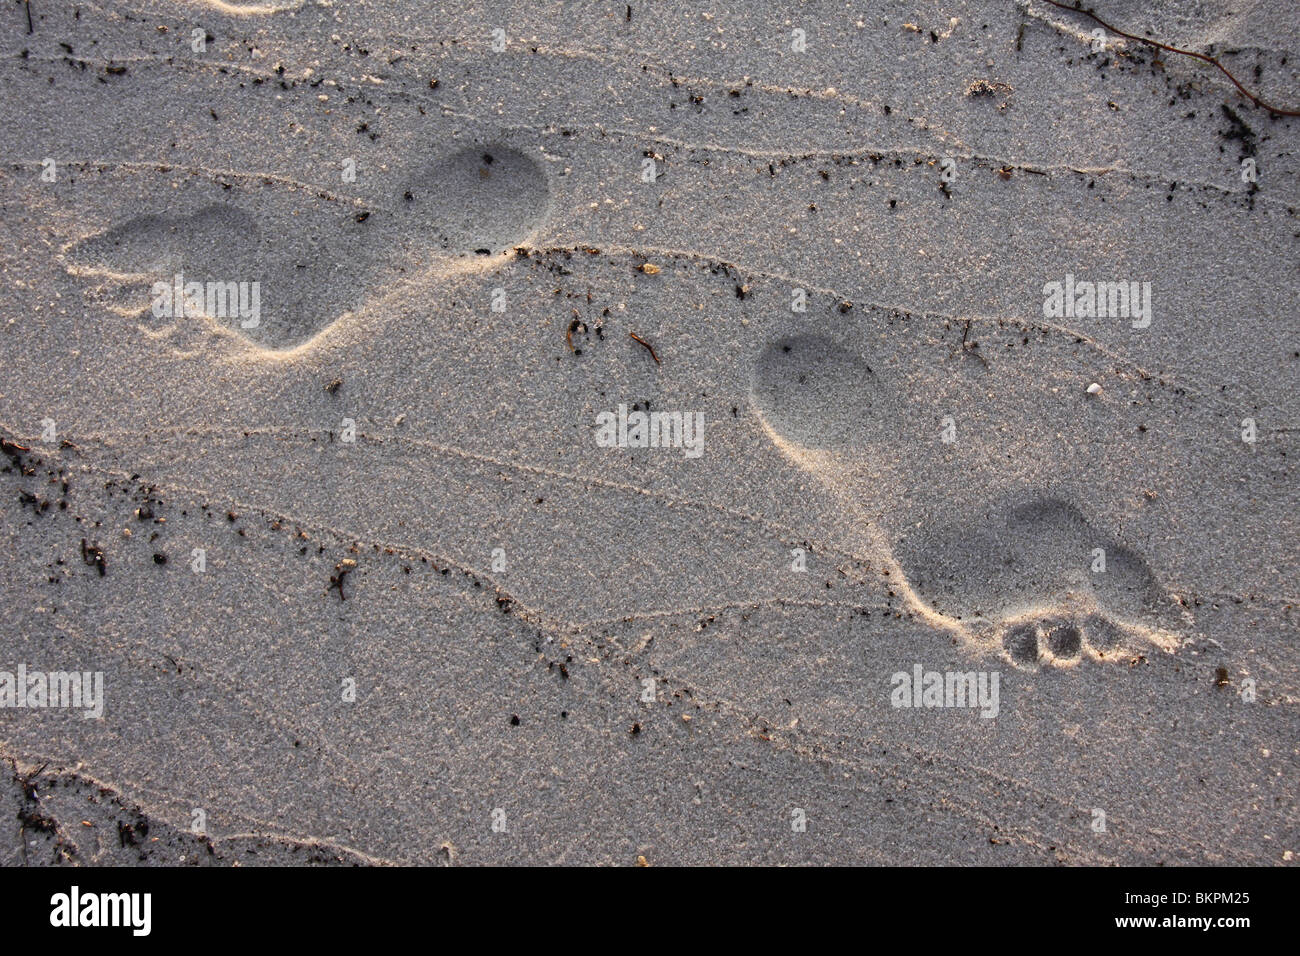 Footprints in the sand, Bald Point, Florida Stock Photo